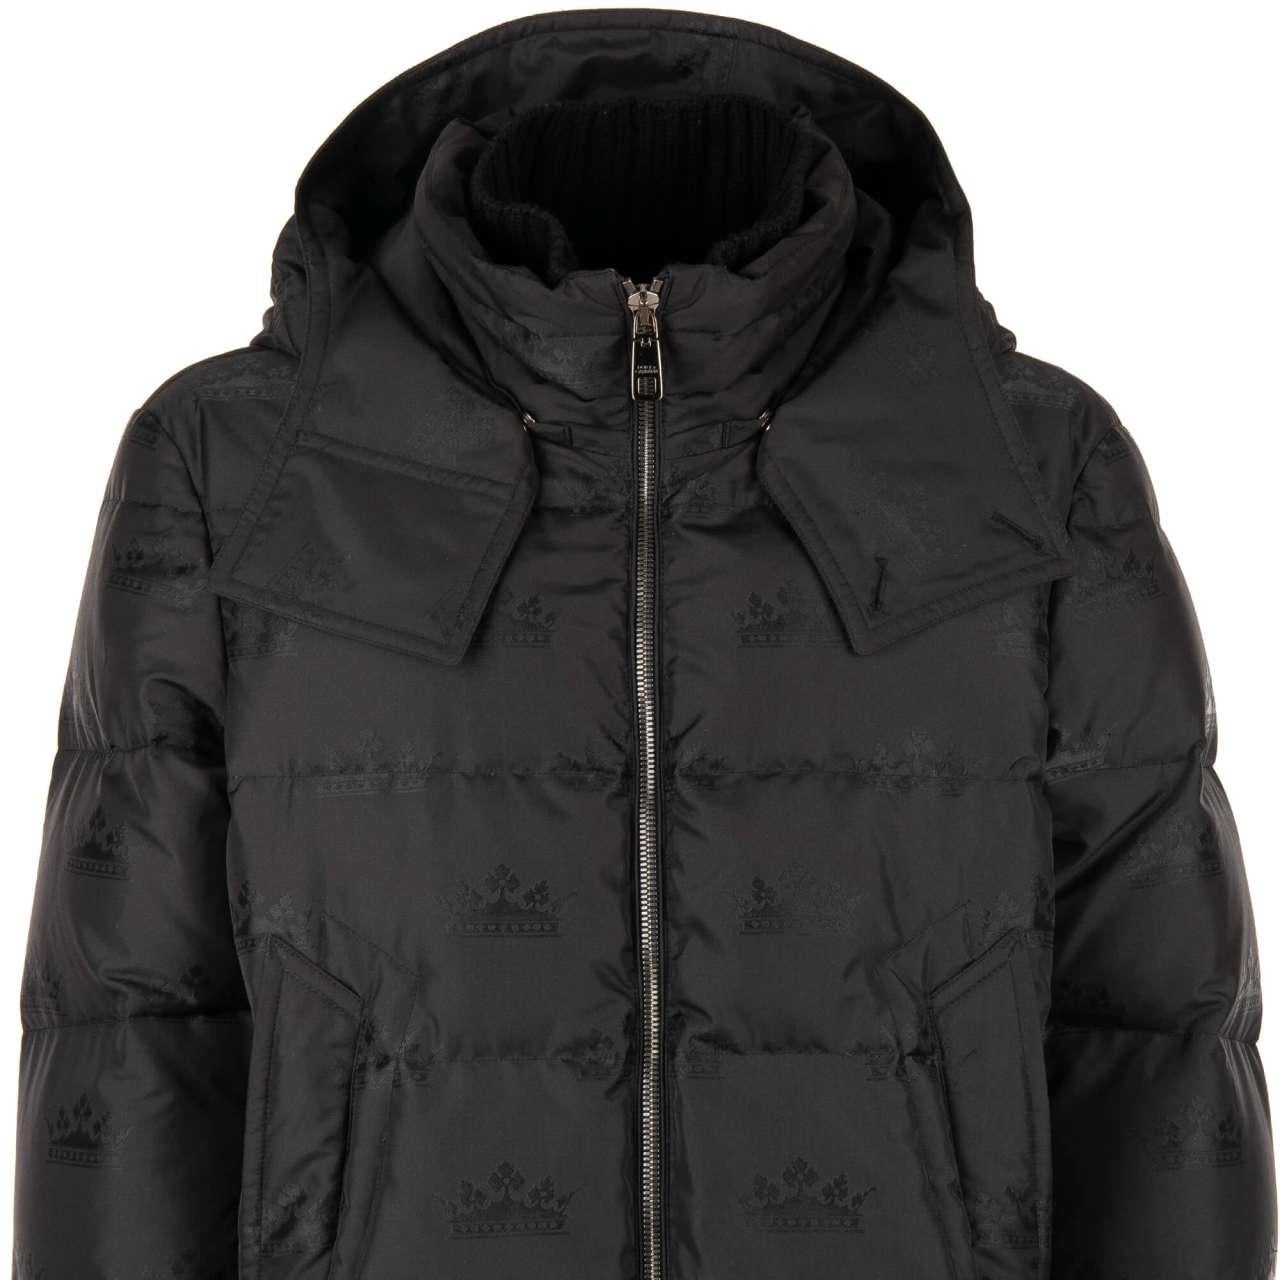 Men's D&G Crowns Textured Hooded Down Jacket with Knit Details Black 50 M-L For Sale